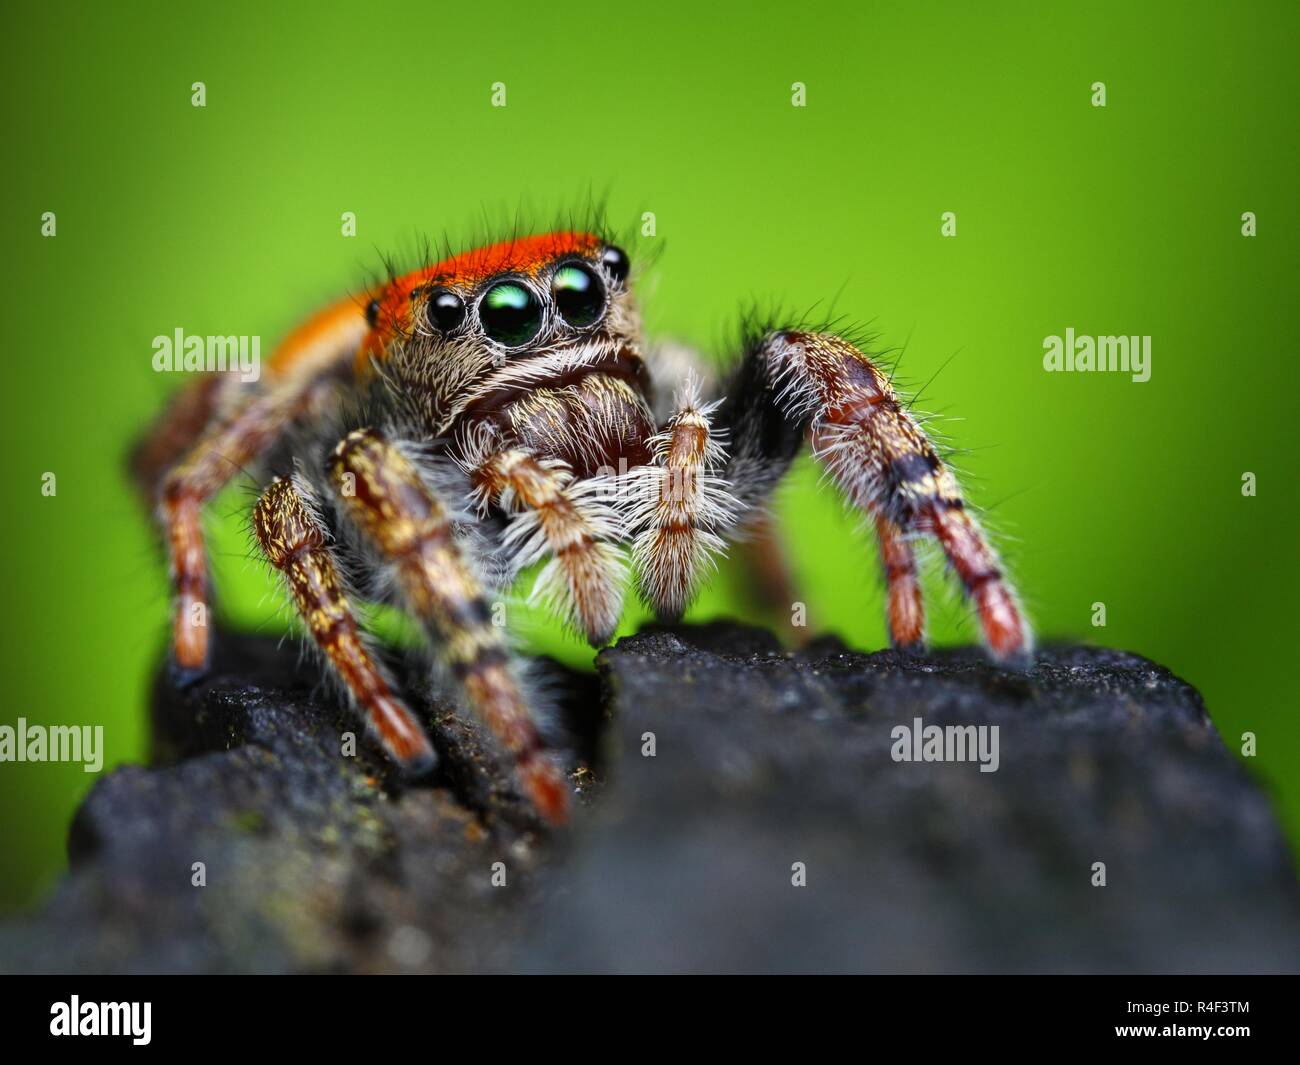 Beautiful close-up of a (Phidippus whitmani) Jumping spider. Stock Photo